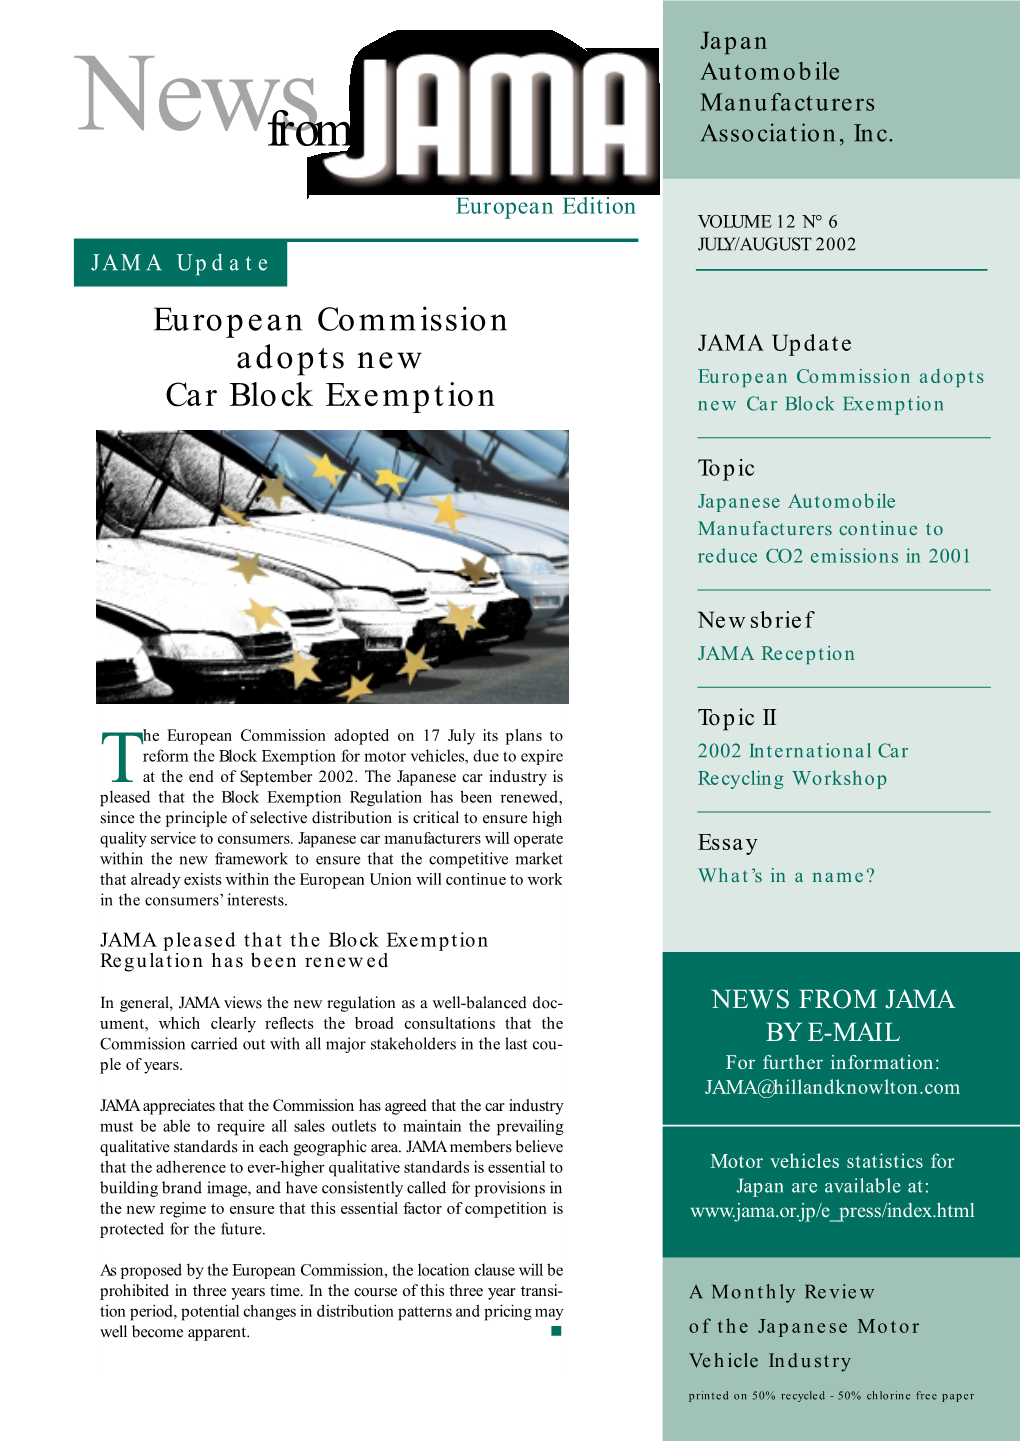 European Commission Adopts New Car Block Exemption